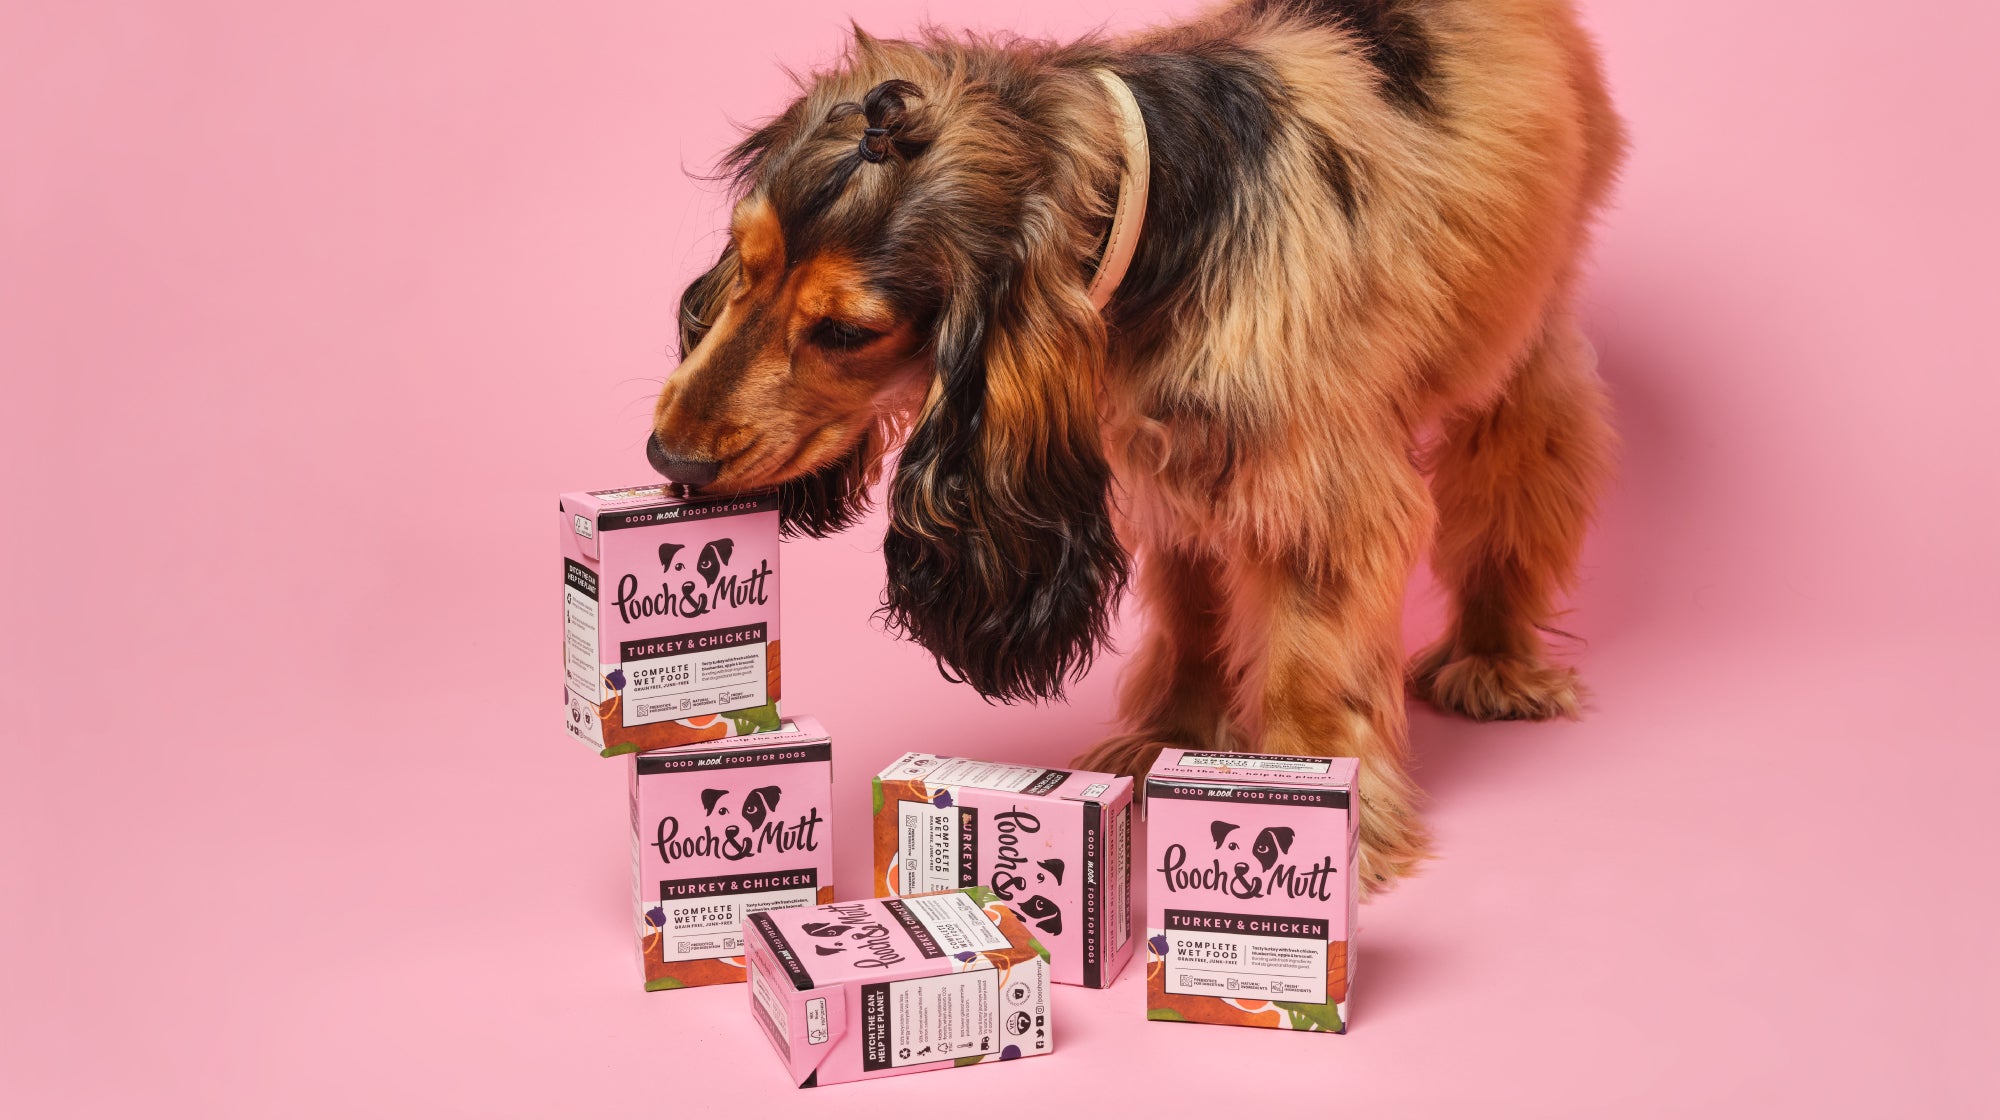 dog on a pink background interested in a tower of dog wet food cartons